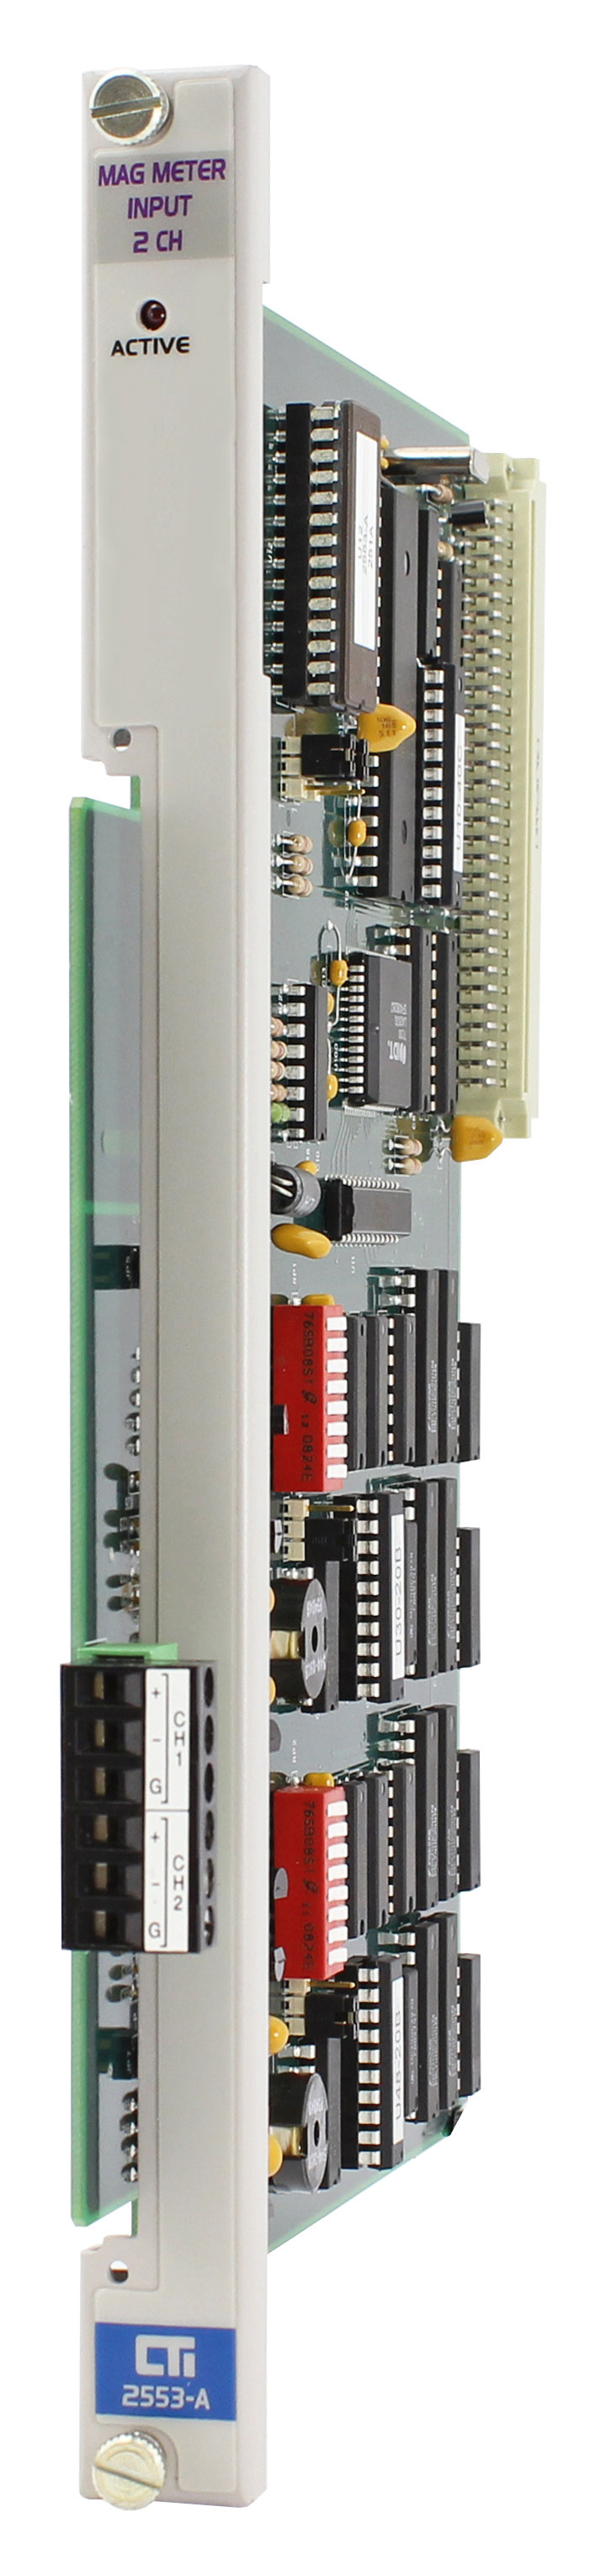 2553-A 2-Channel Mag Meter Input Module (MATURE)